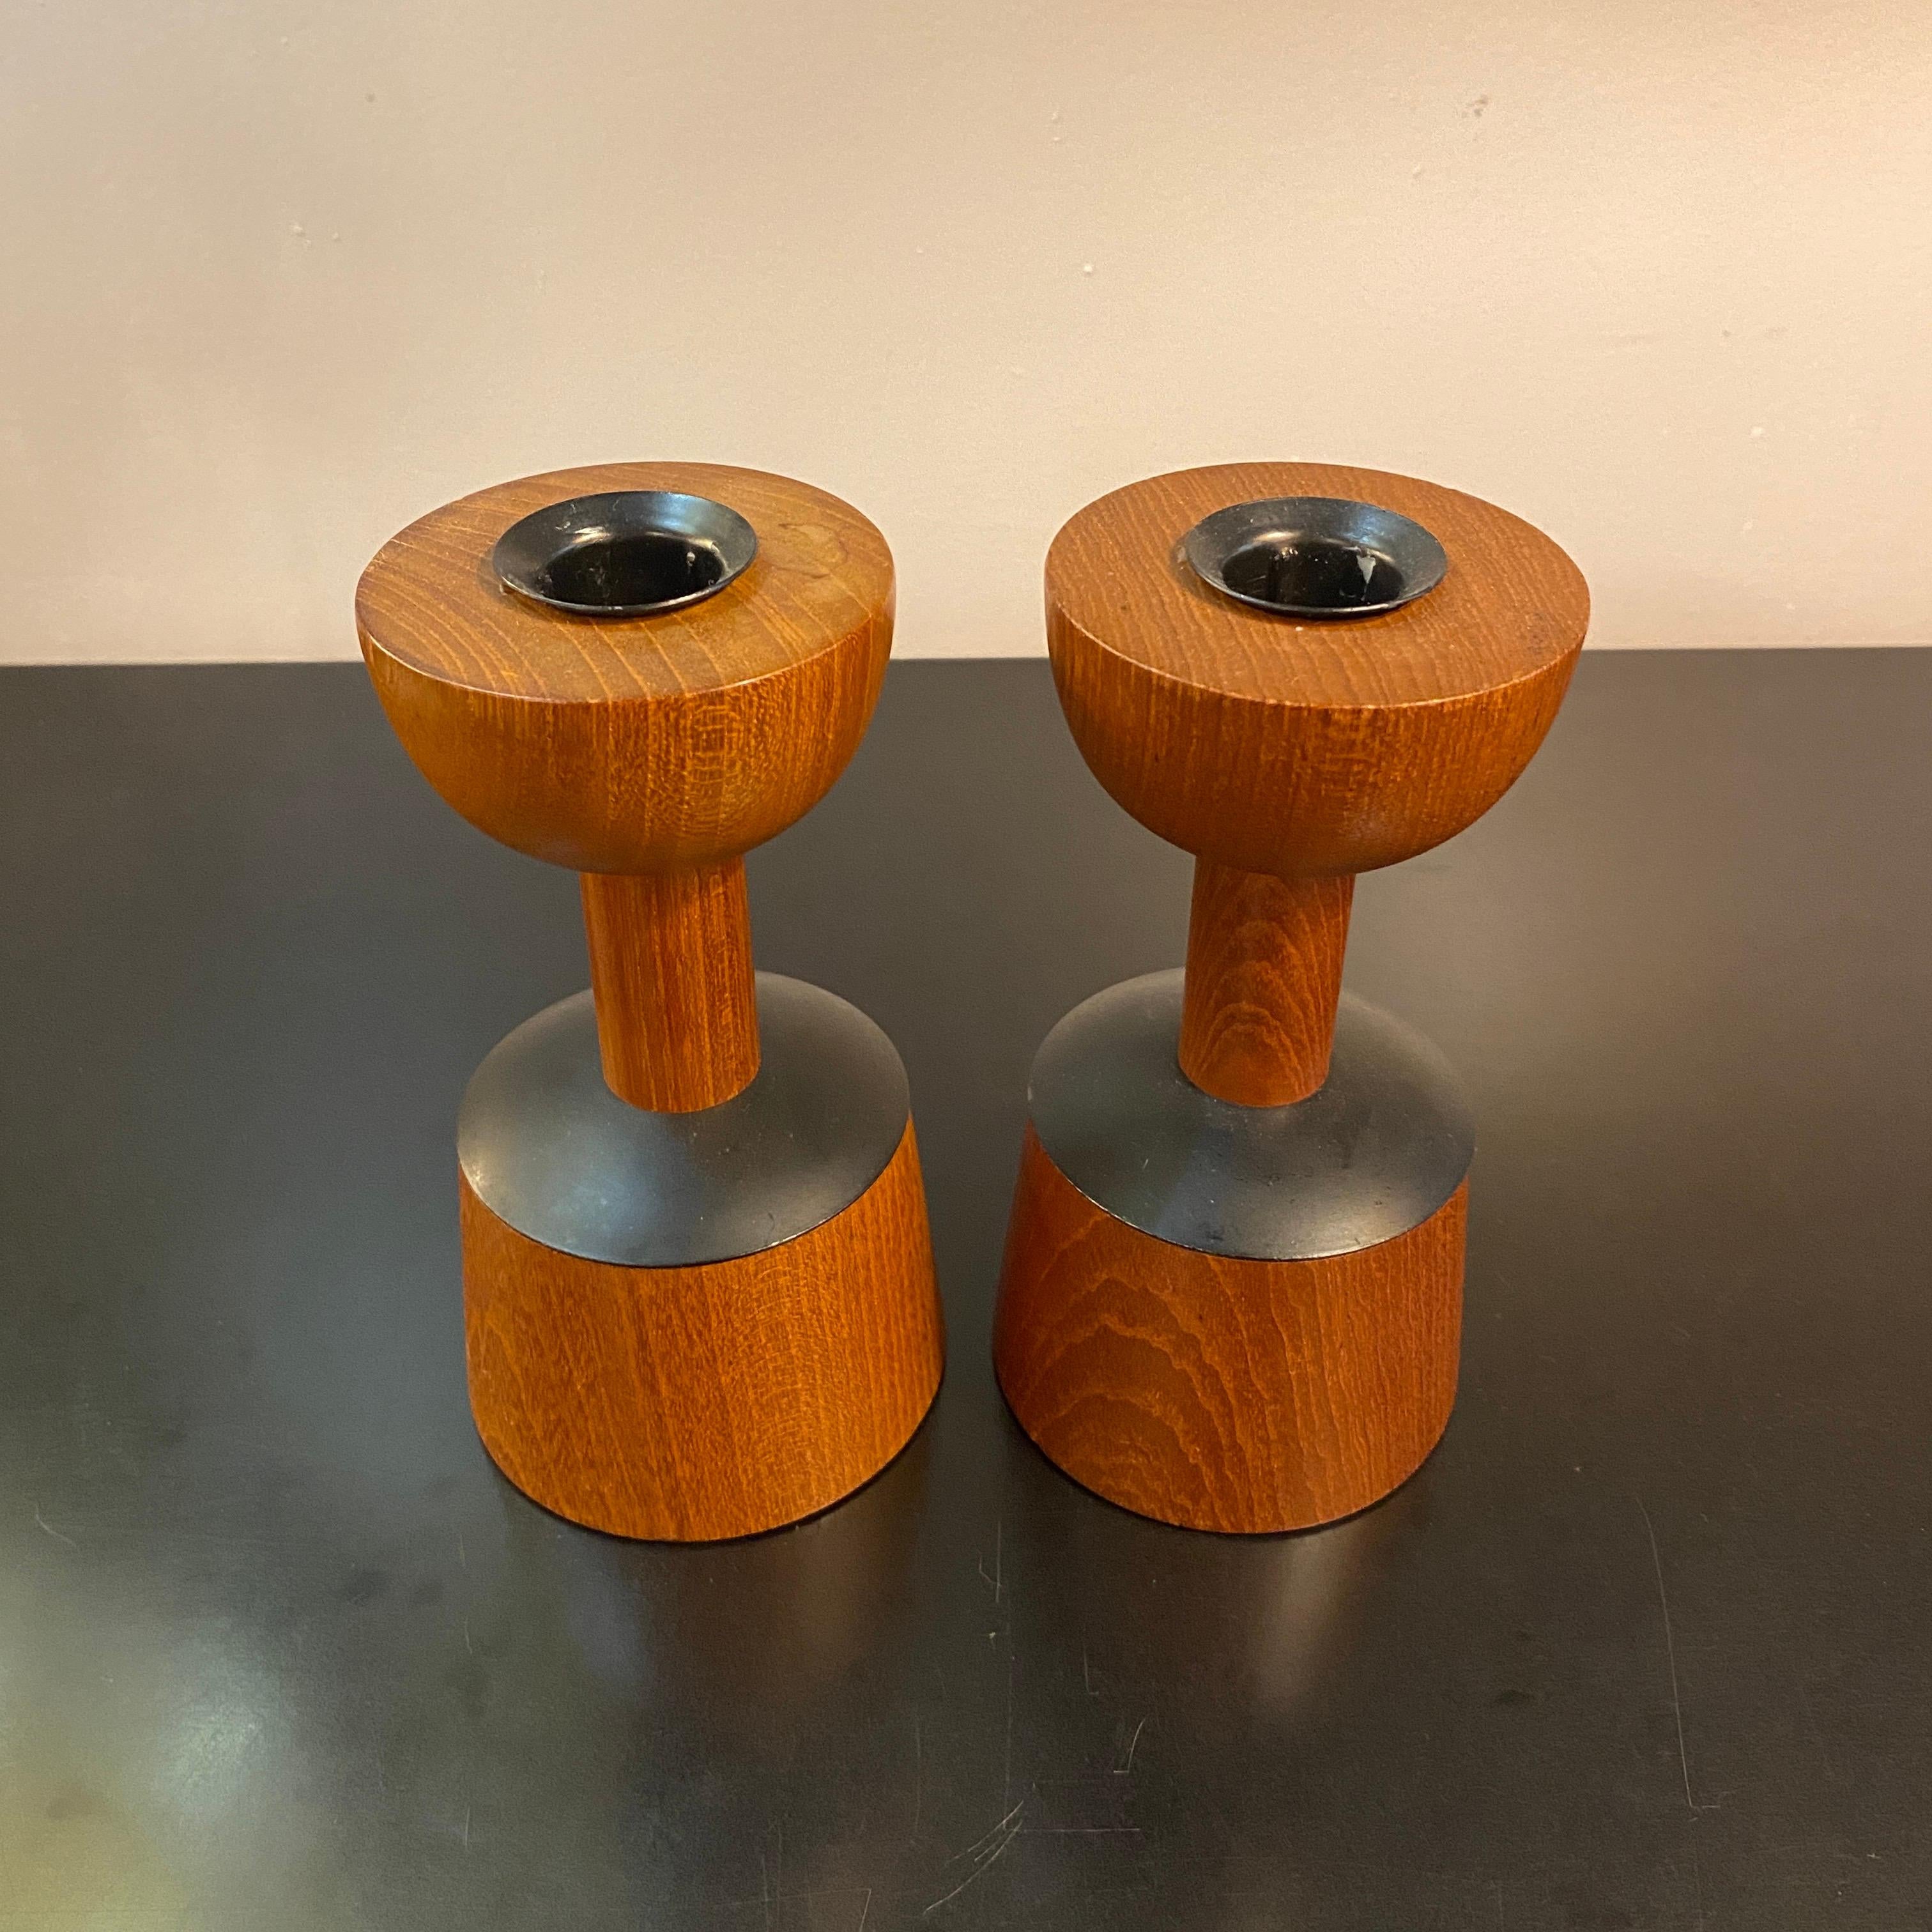 Pair of chic, Scandinavian modern, rosewood candleholders by Laurids Lonborg feature lovely tapered silhouettes with blackened metal accents. 